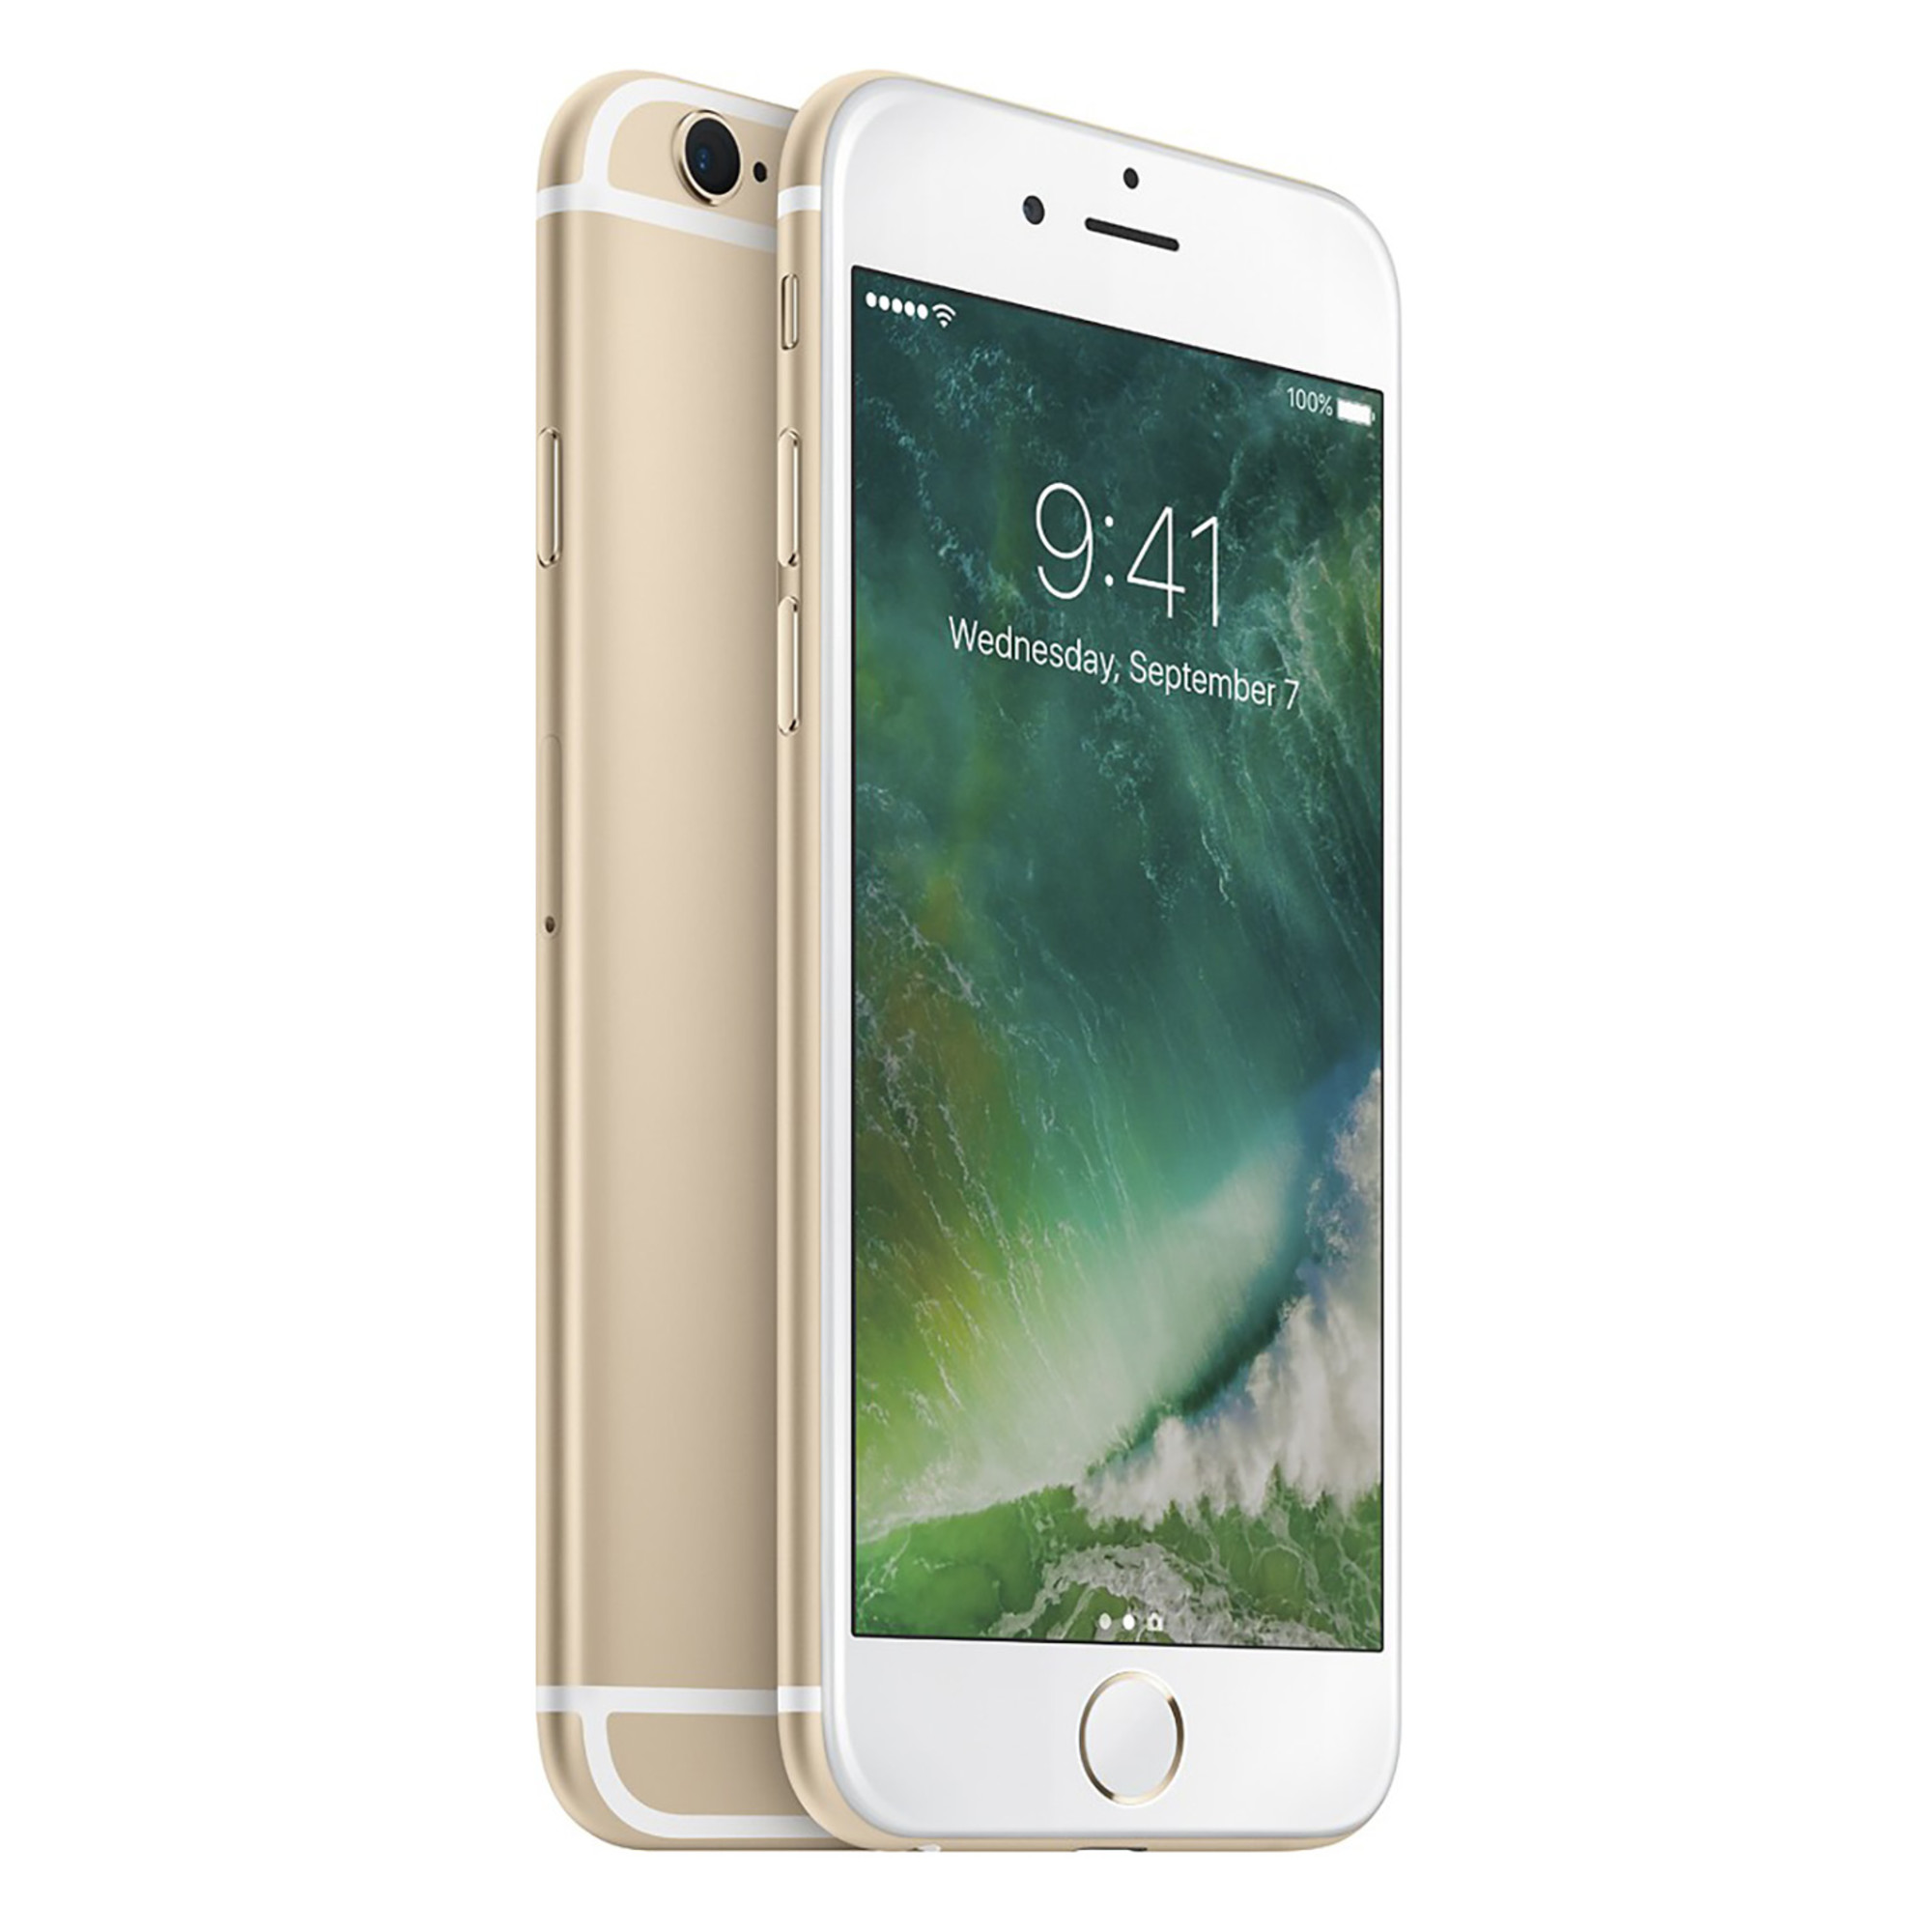 Pre-Owned Apple iPhone 6s 128GB GSM Phone - Gold + WeCare Alcohol Wipes Pack (50 Wipes) (Refurbished: Good) - image 1 of 6